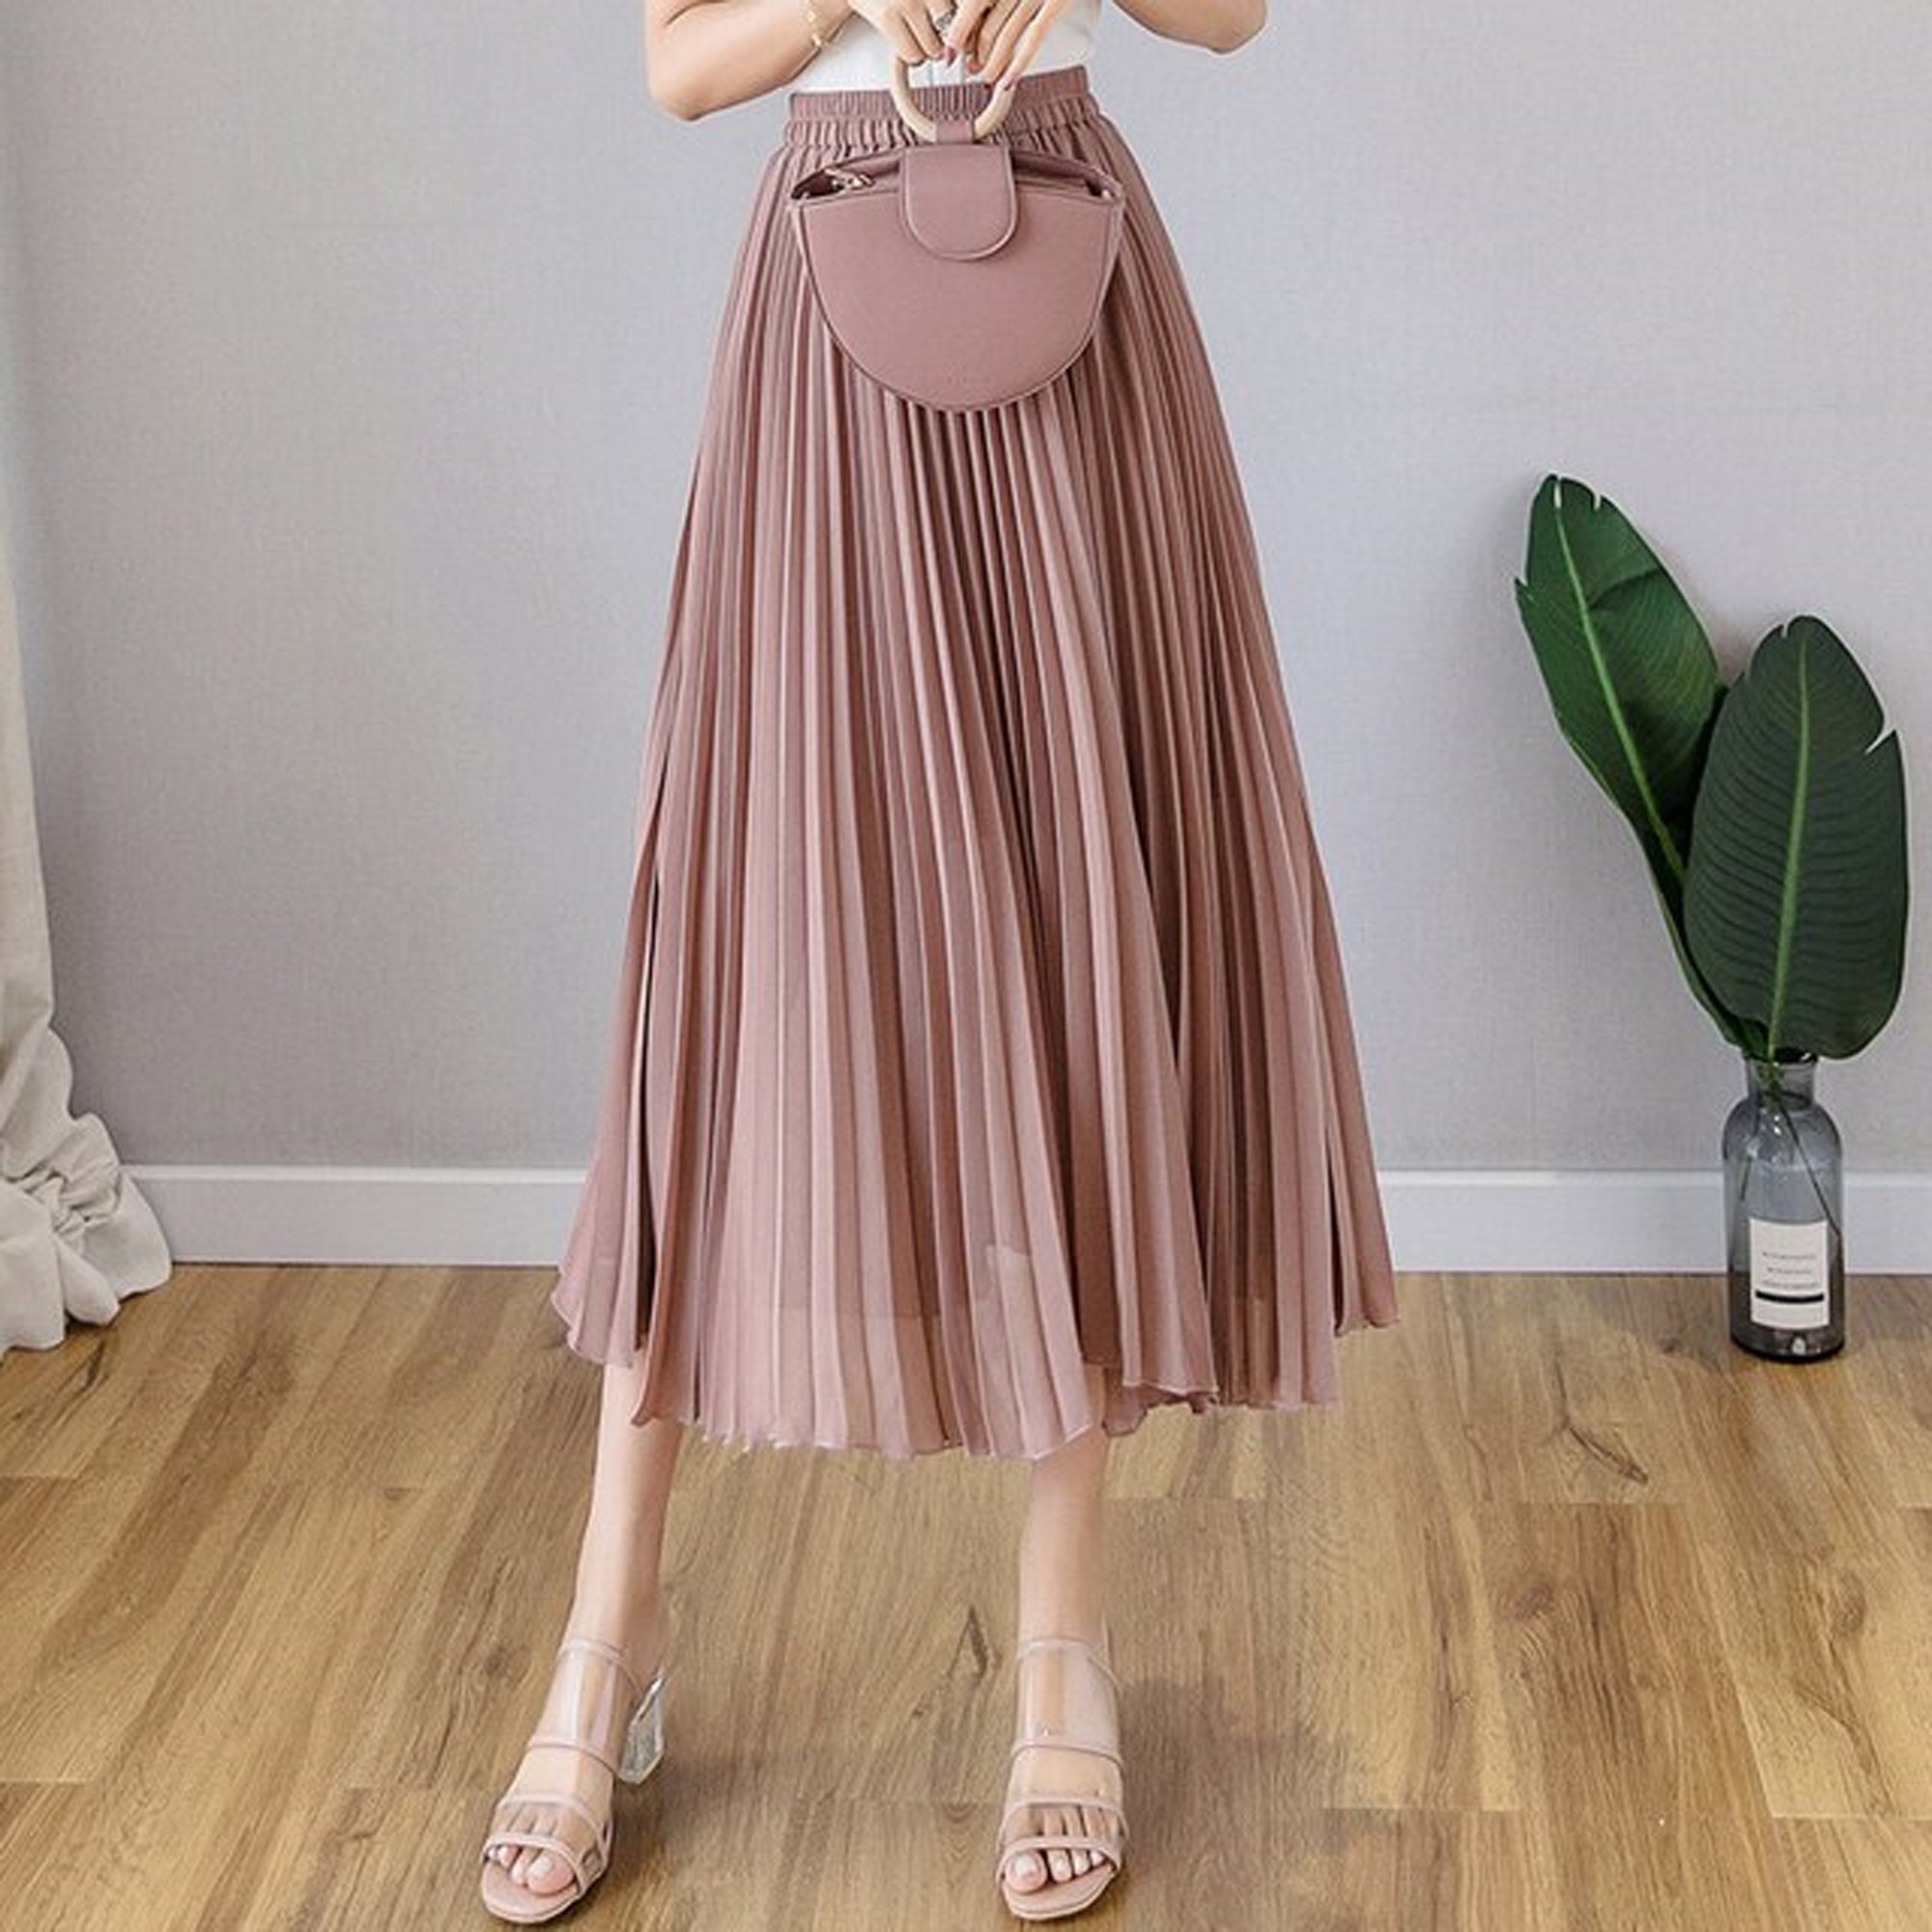 Chiffon Korean Skirts Women's Solid Color Pleated Summer - Etsy